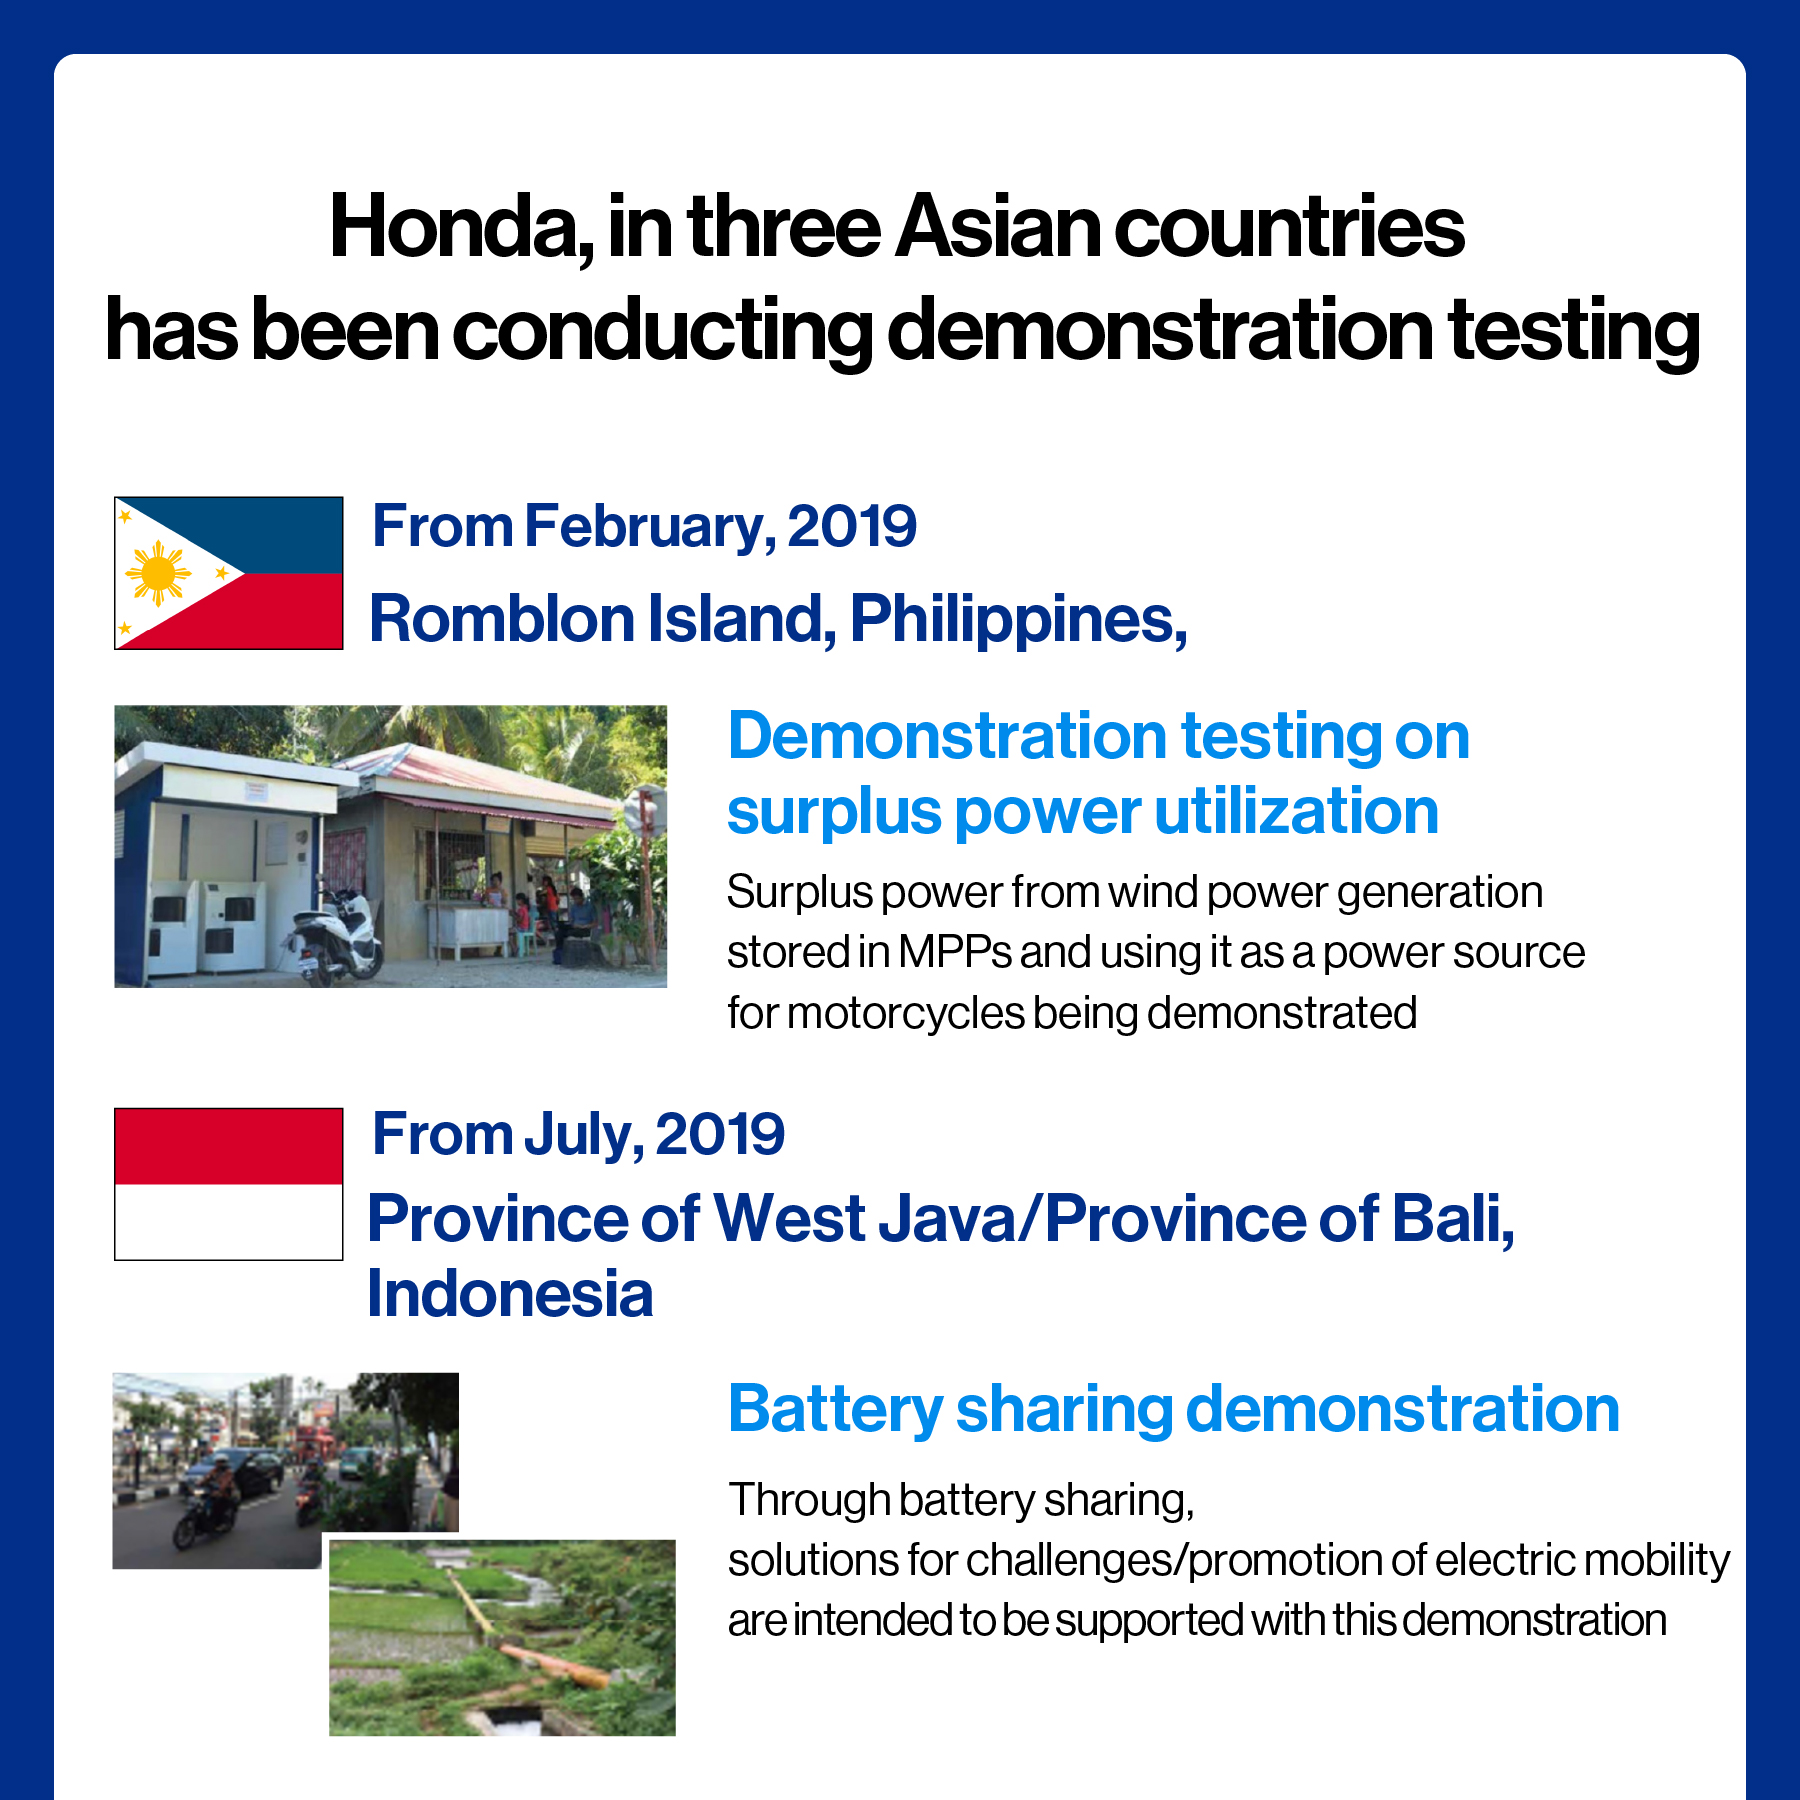 Demonstration tests conducted by Honda in Asia (Philippines, Indonesia)